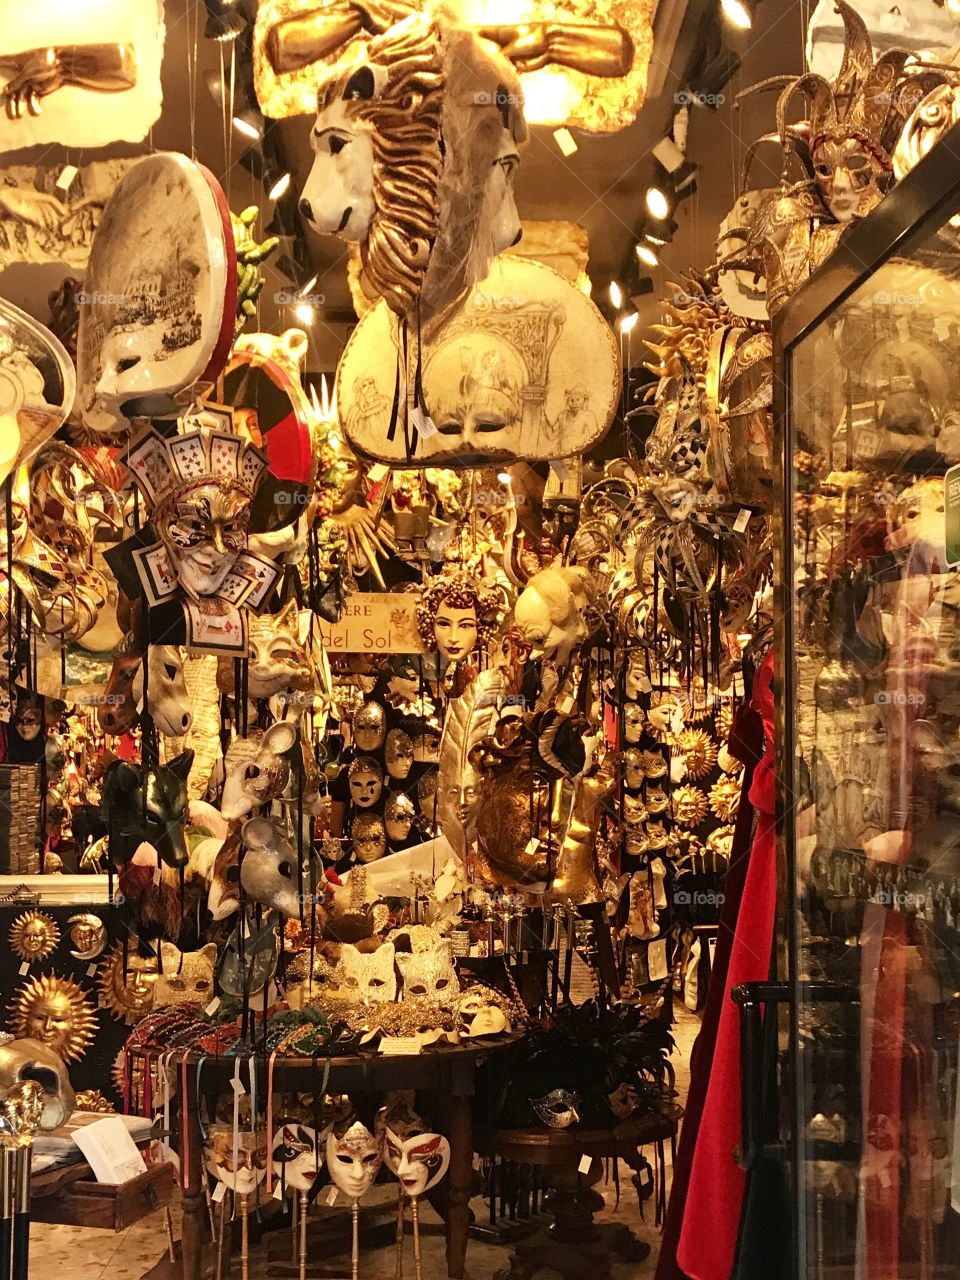 The Essence of Carnivale, Venice shop windows adorned! This is a great puzzle, I’m going to send it to my Dad!